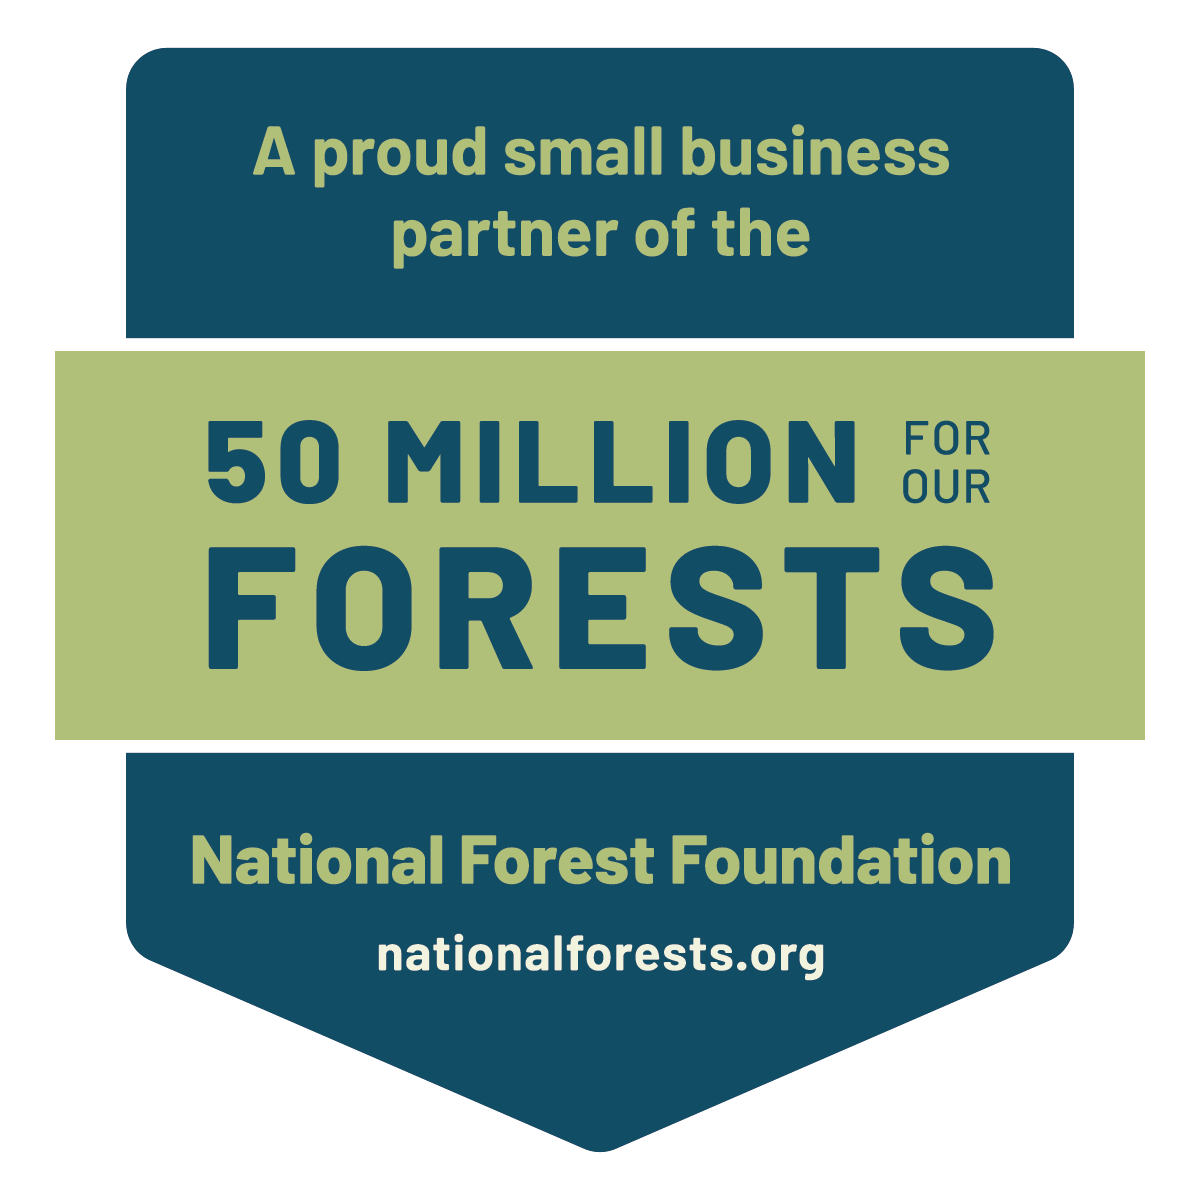 A proud small business partner of the 50 million for our forests. National Forest Foundation.